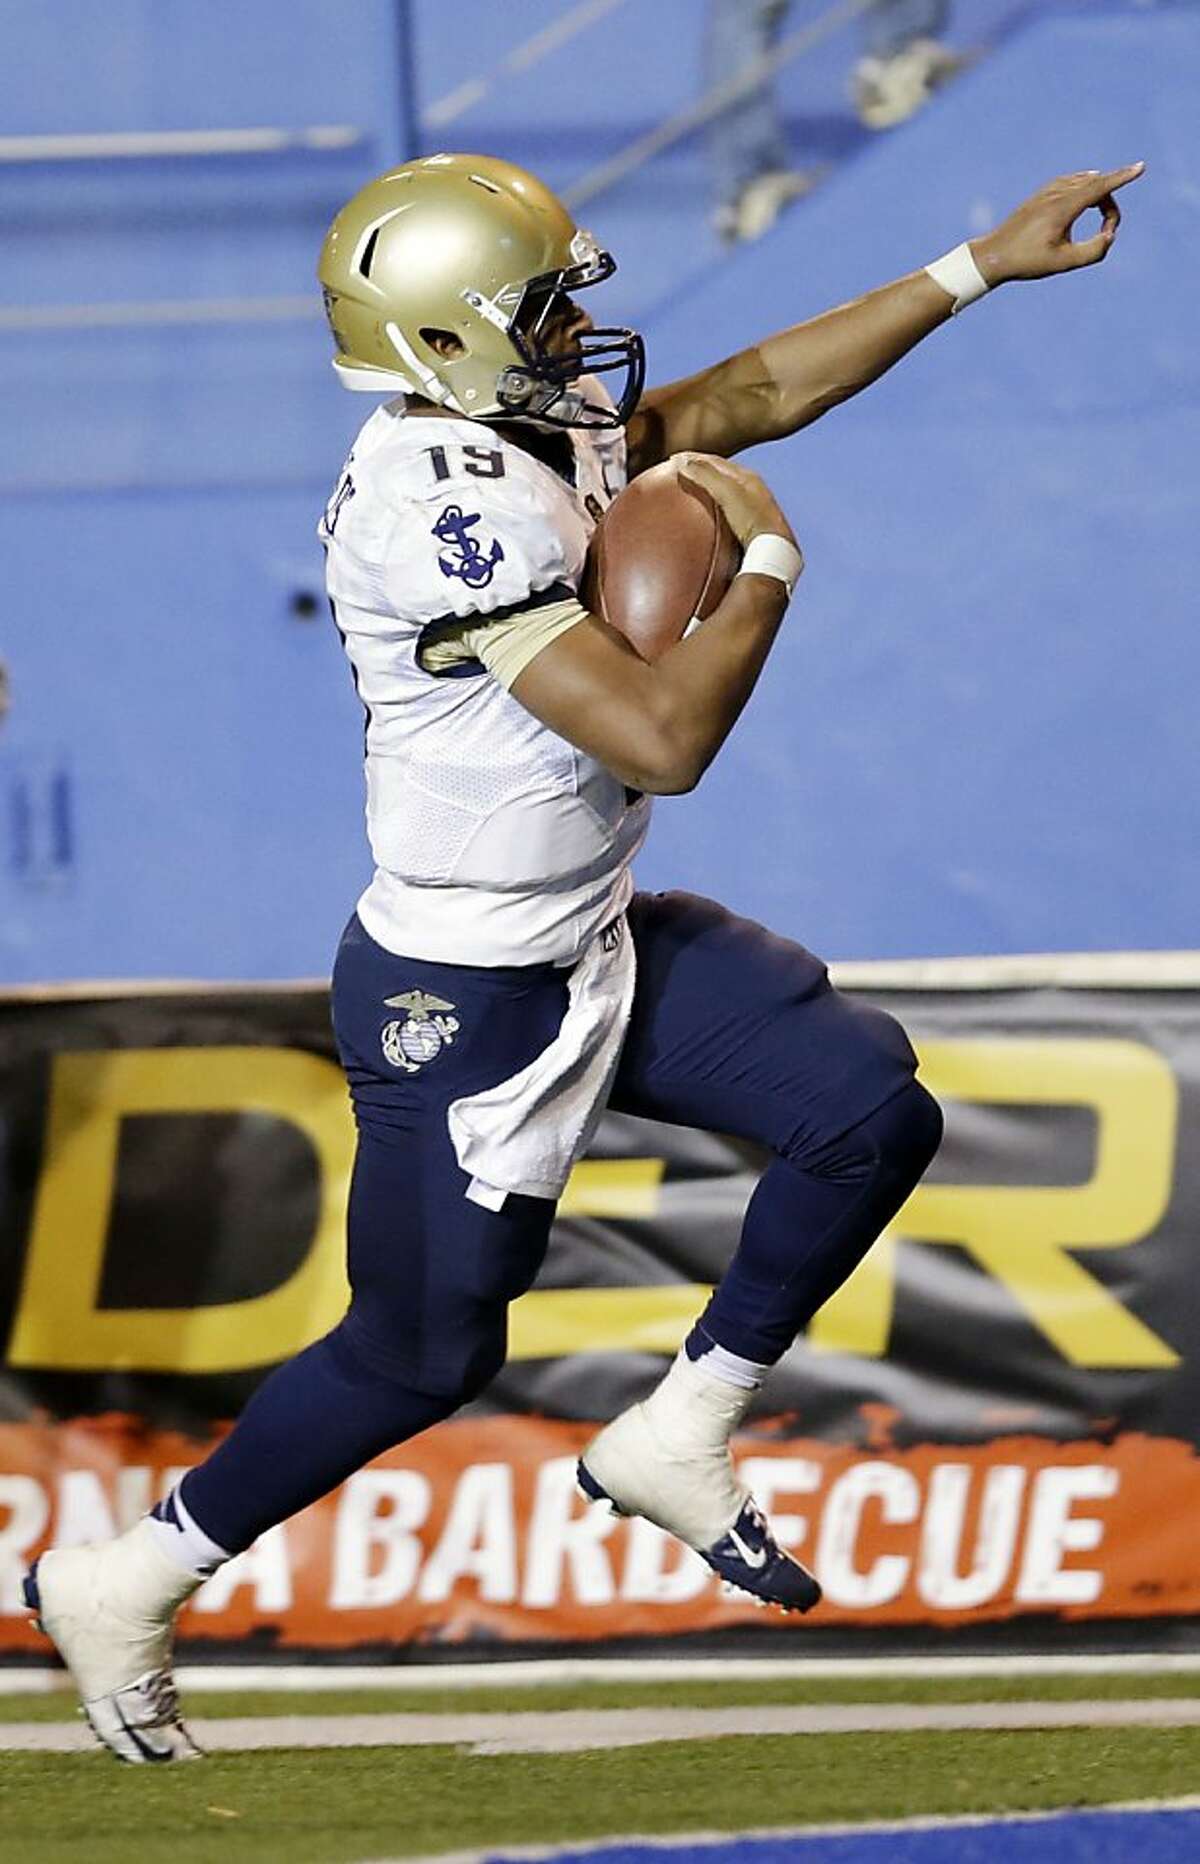 Navy quarterback Keenan Reynolds celebrates as he score the game-winning touchdown in triple overtime for a 58-52 win over San Jose State in an NCAA college football game on Friday, Nov. 22, 2013, in San Jose, Calif. N (AP Photo/Marcio Jose Sanchez)